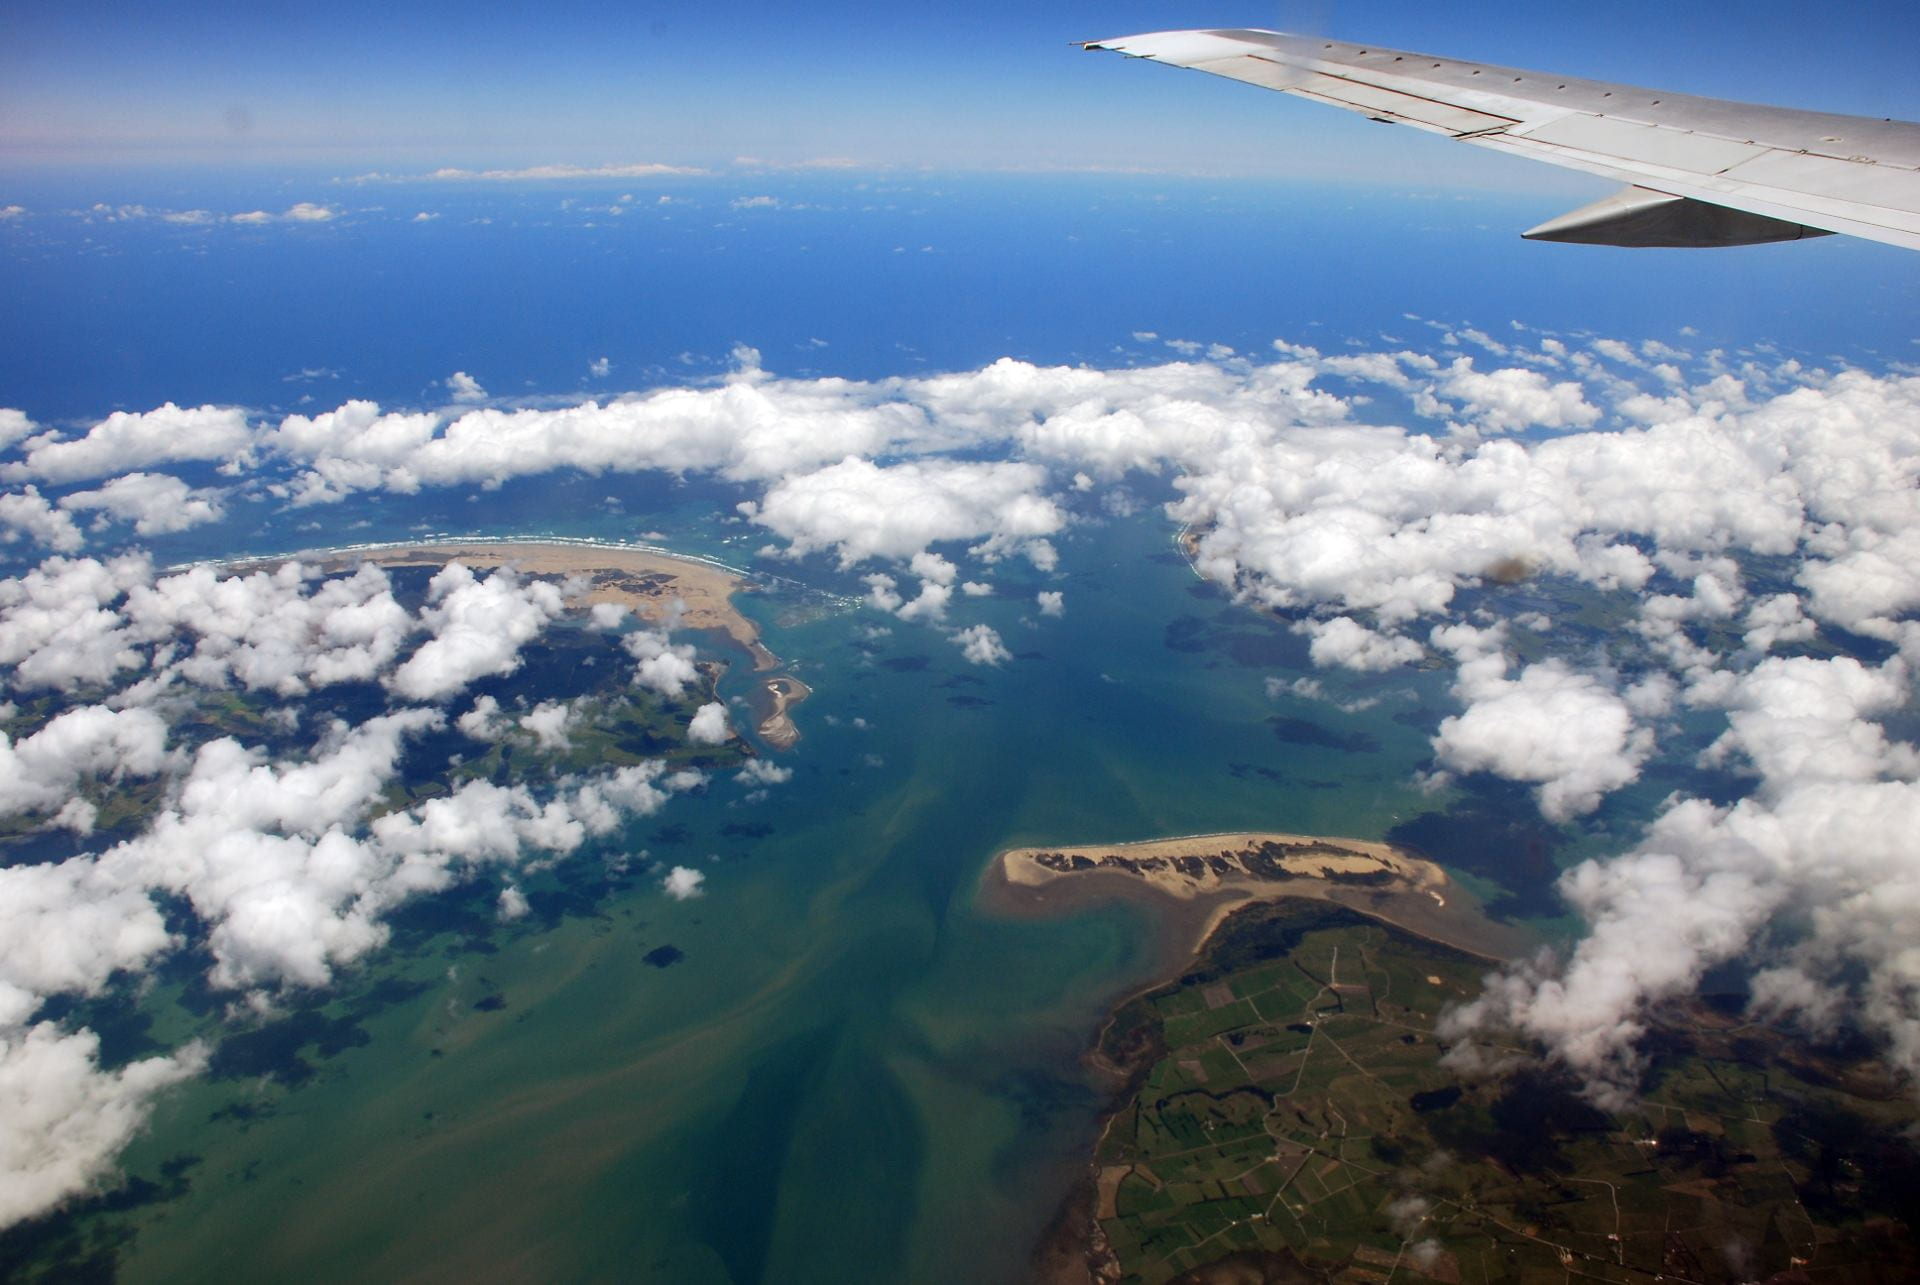 Entrance to Kaipara Harbour viewed from above